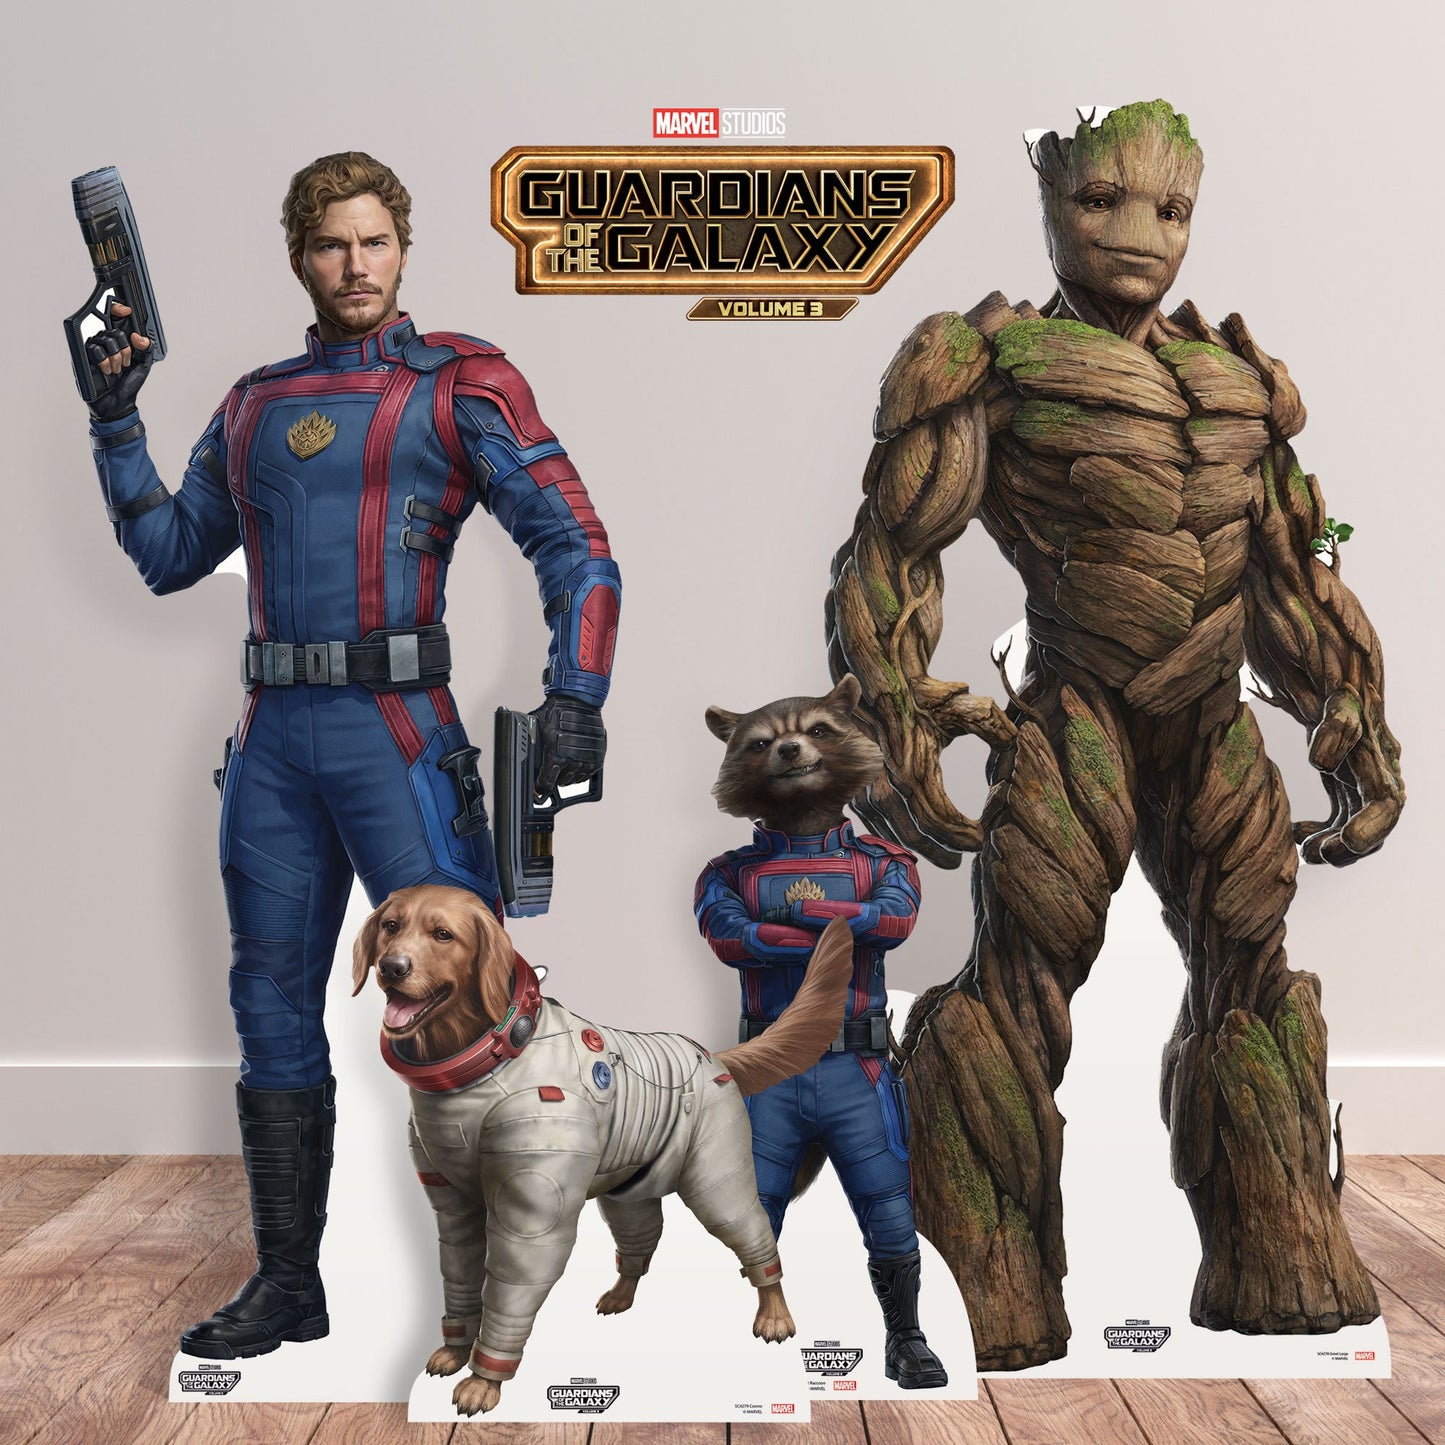 SC4278 Groot Large Guardians of the Galaxy Three Marvel Lifesize Cardboard Cut Out With Mini Cardboard Cutout